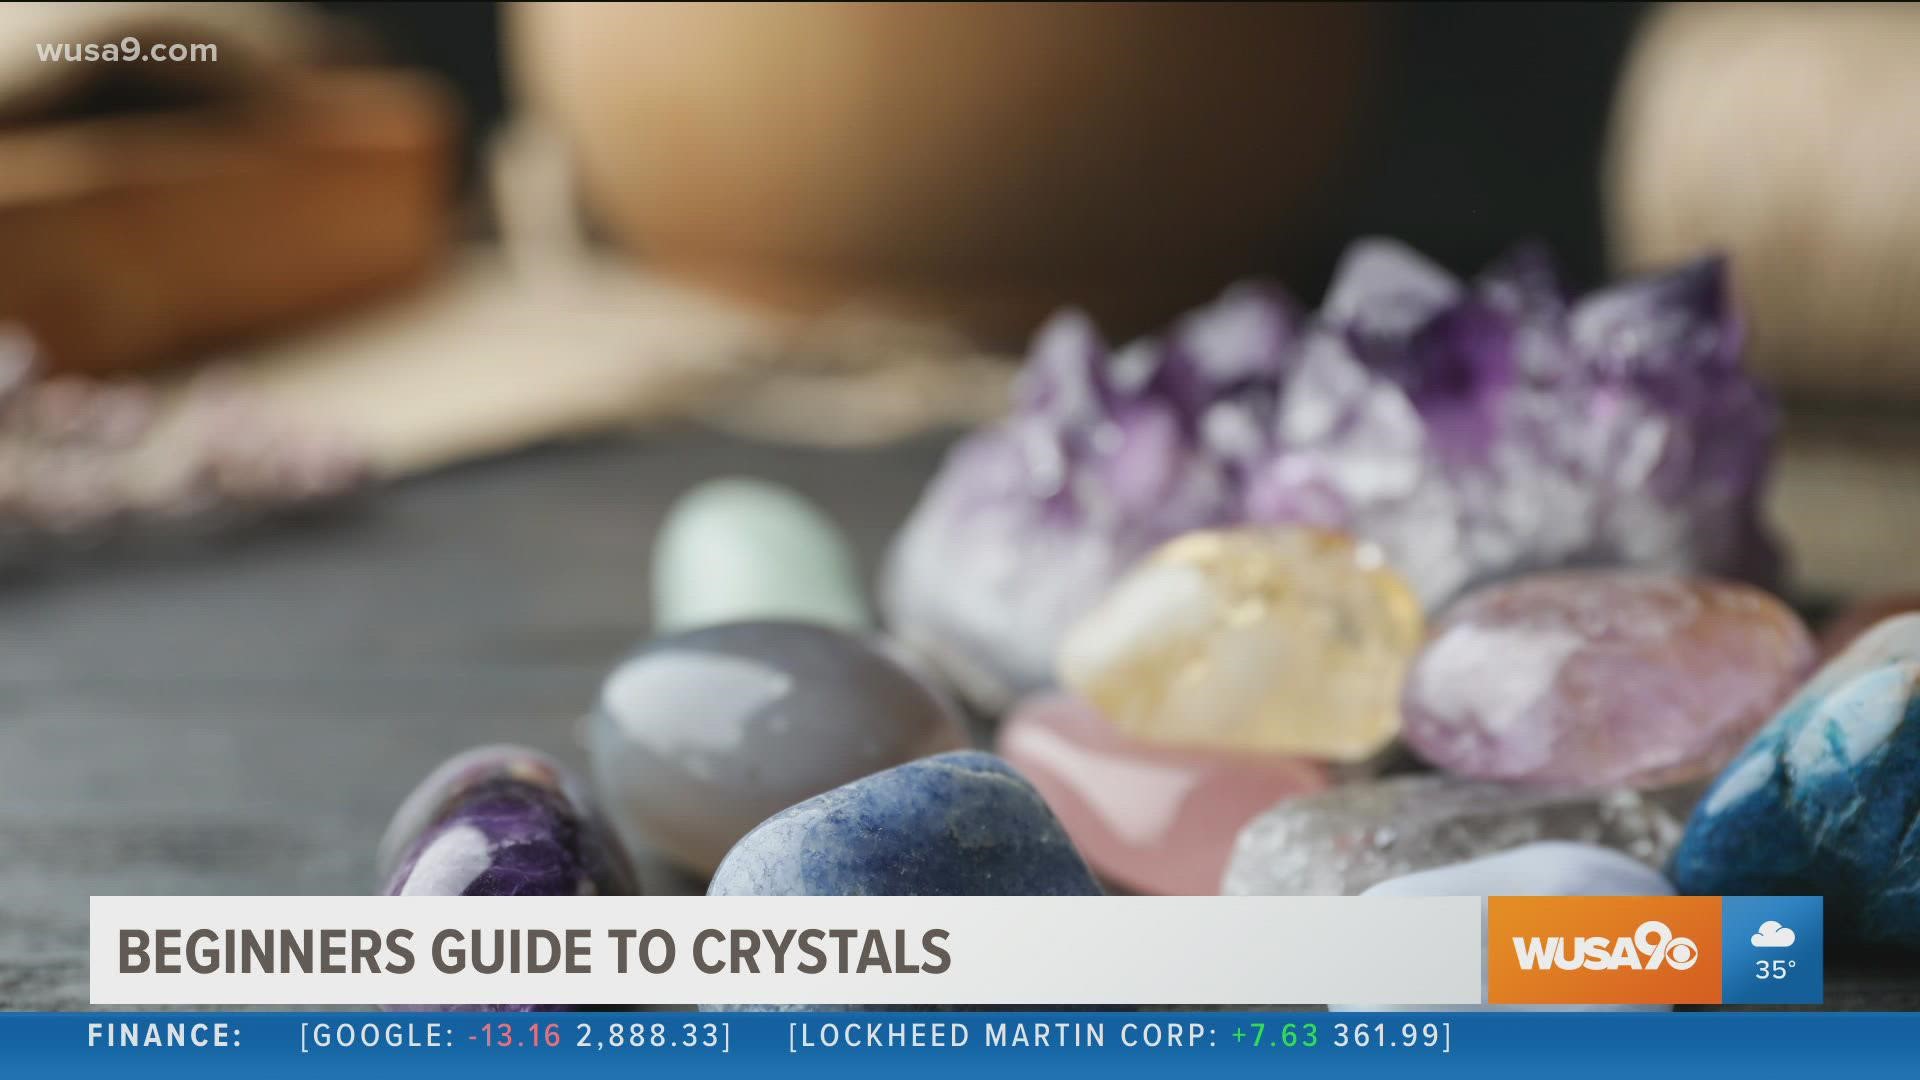 Founder of Spirit Daughter, Jill Wintersteen shares tips if you are new to crystals exploration and understanding.